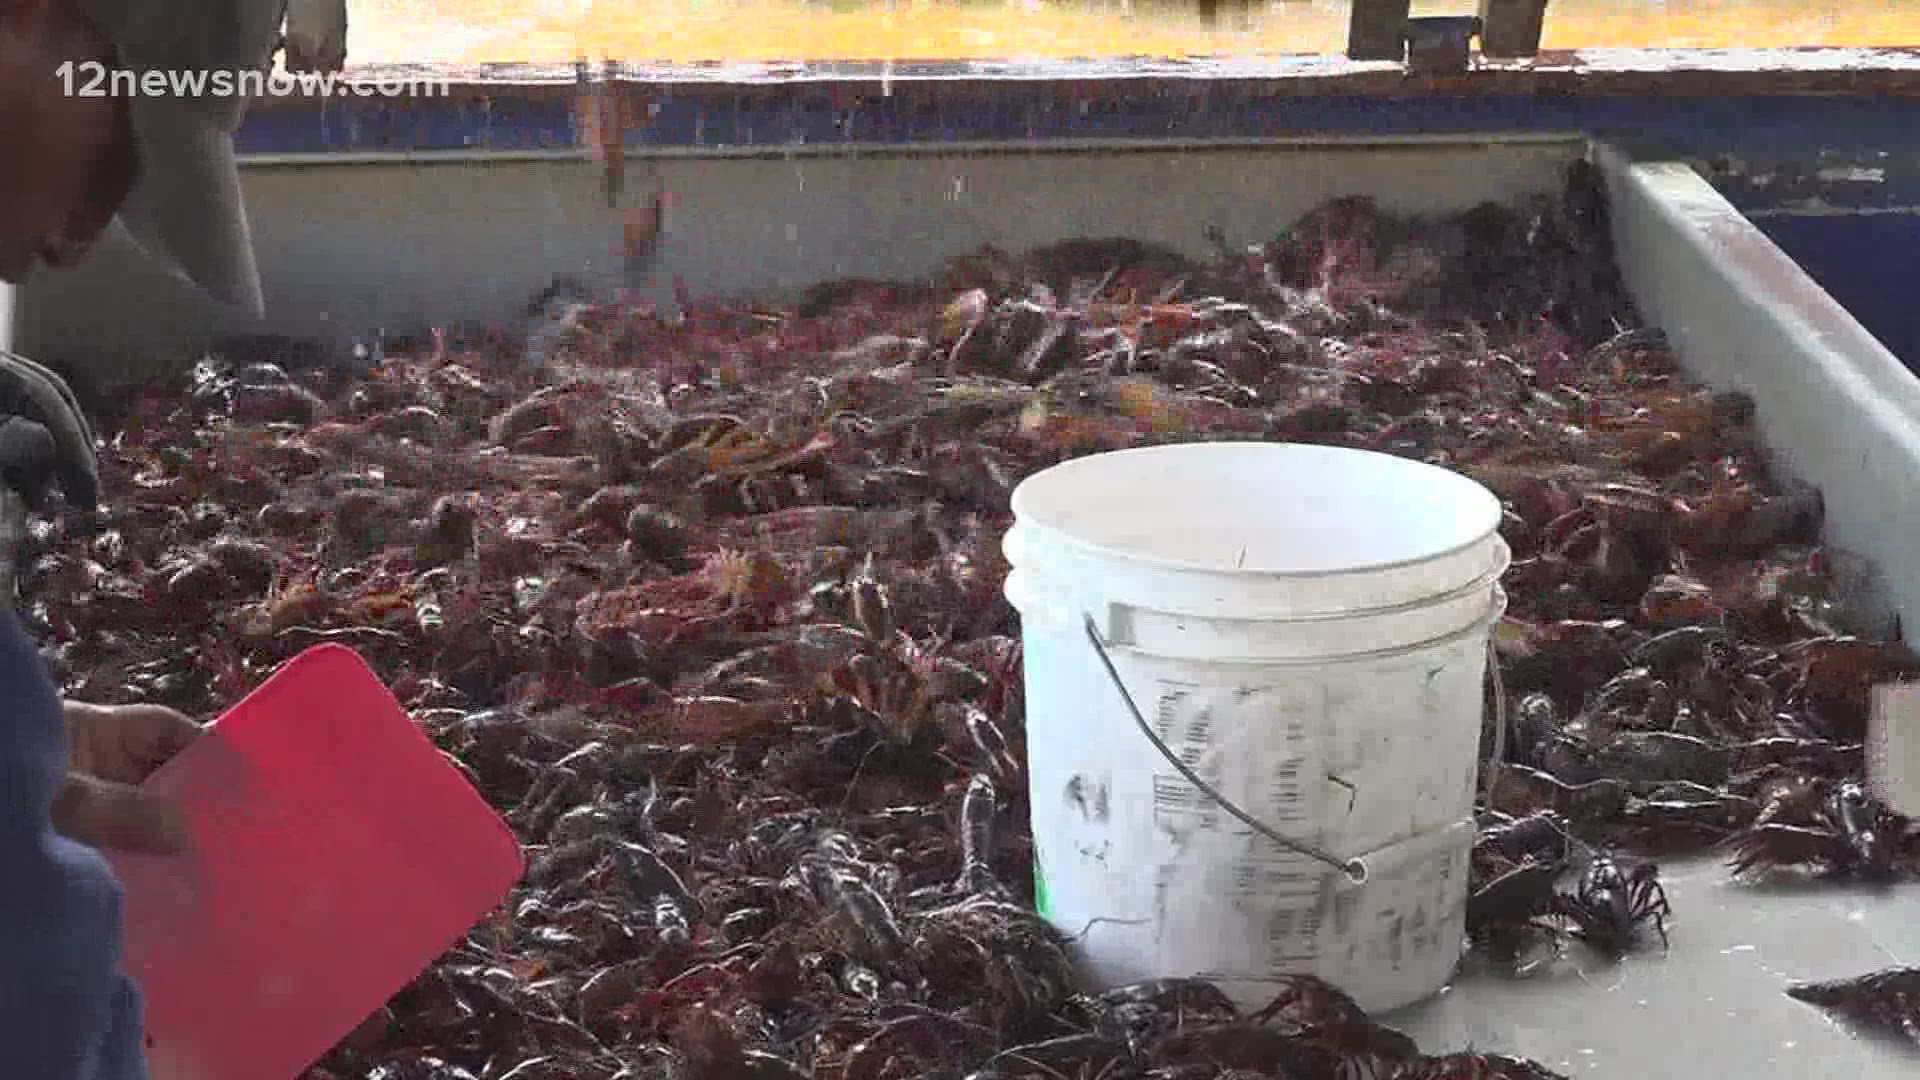 Everyone's looking for mudbugs, but they could be hard to find, and the winter storm and extreme temperatures last week didn't help crawfish farmers.